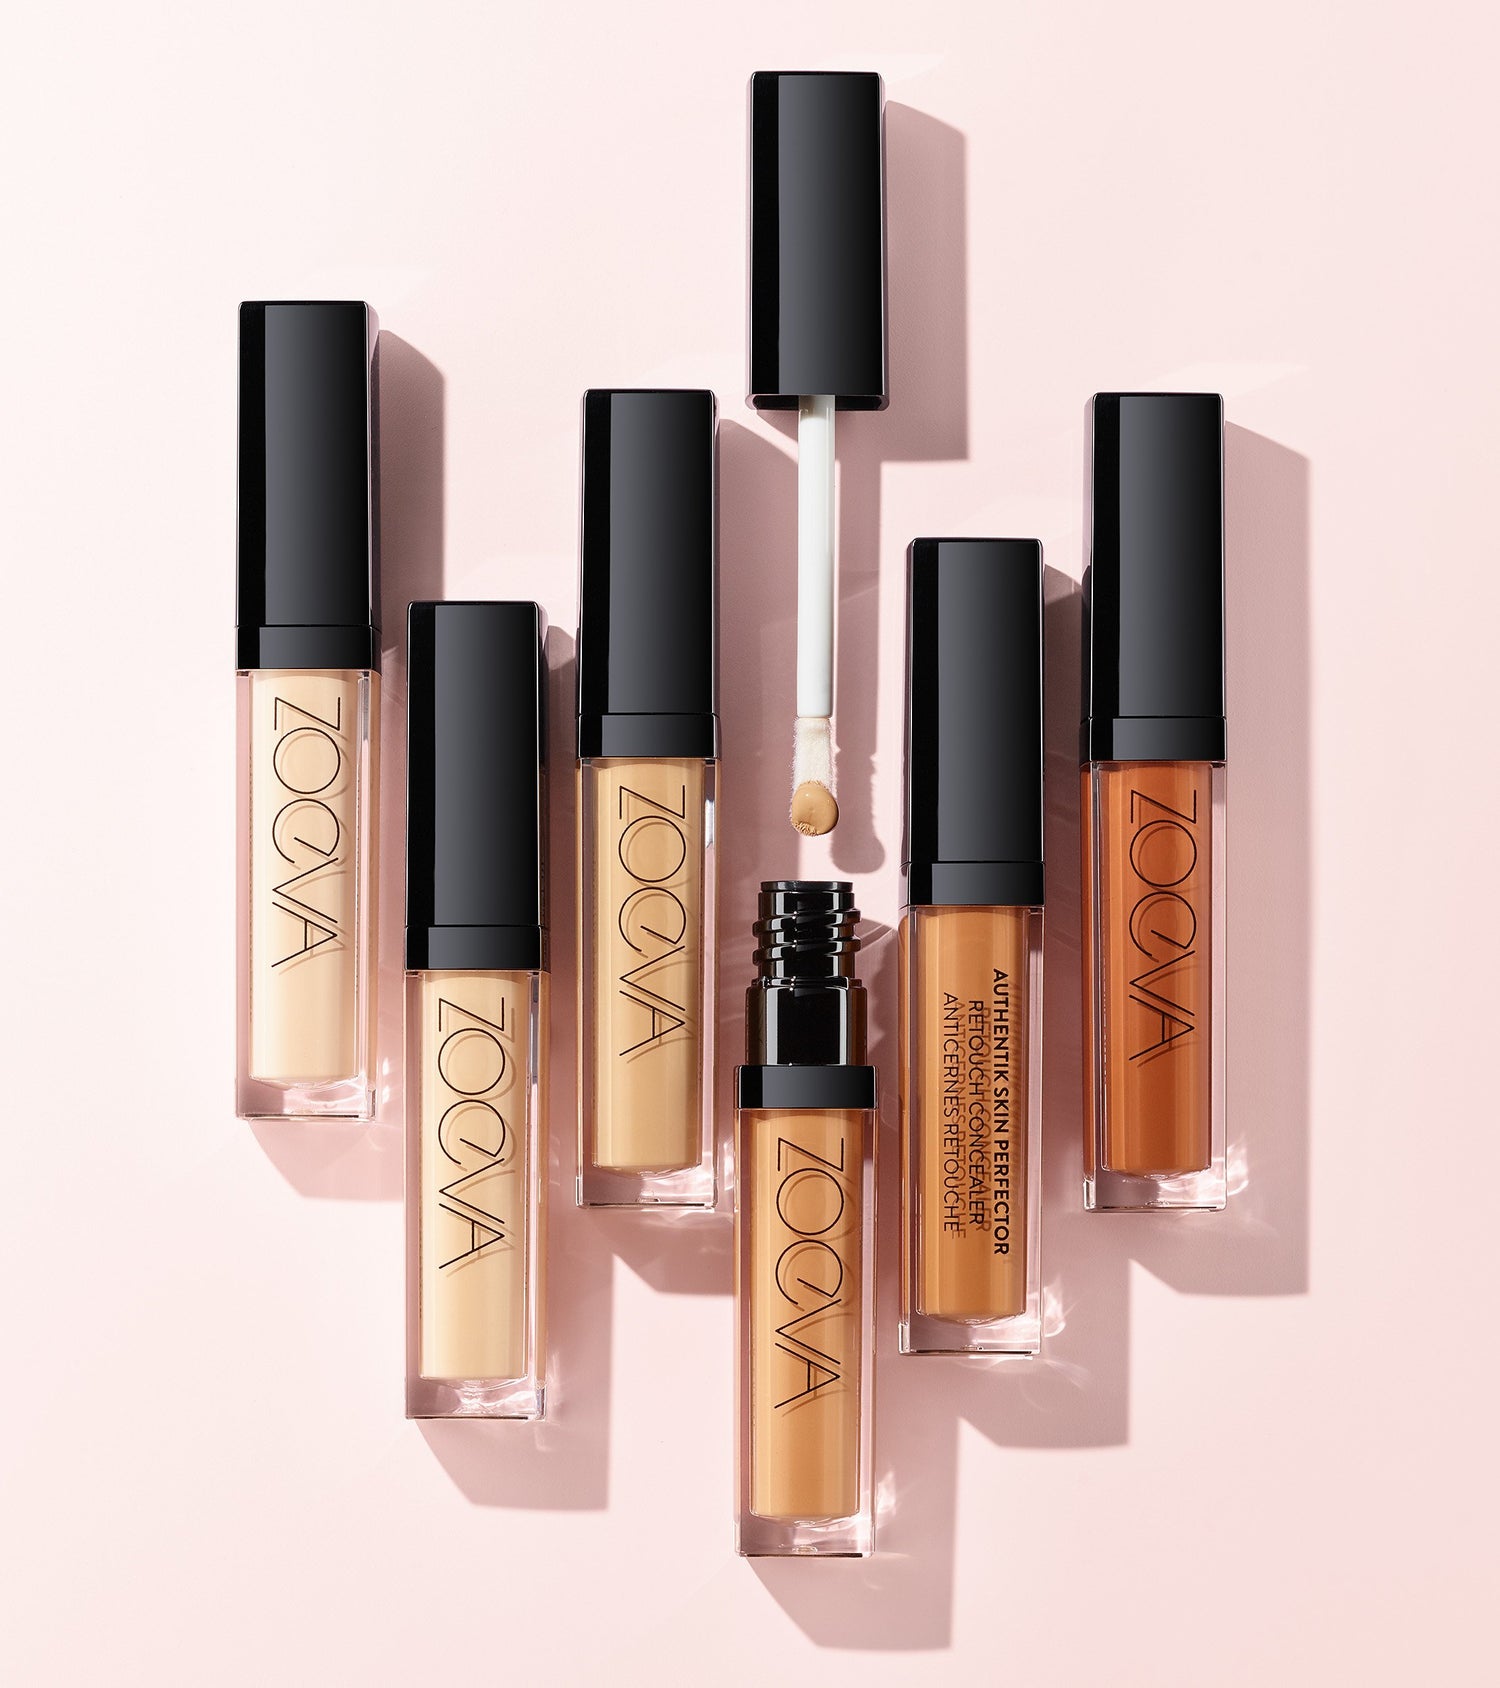 AUTHENTIK SKIN PERFECTOR CONCEALER (120 EVIDENT) Main Image featured